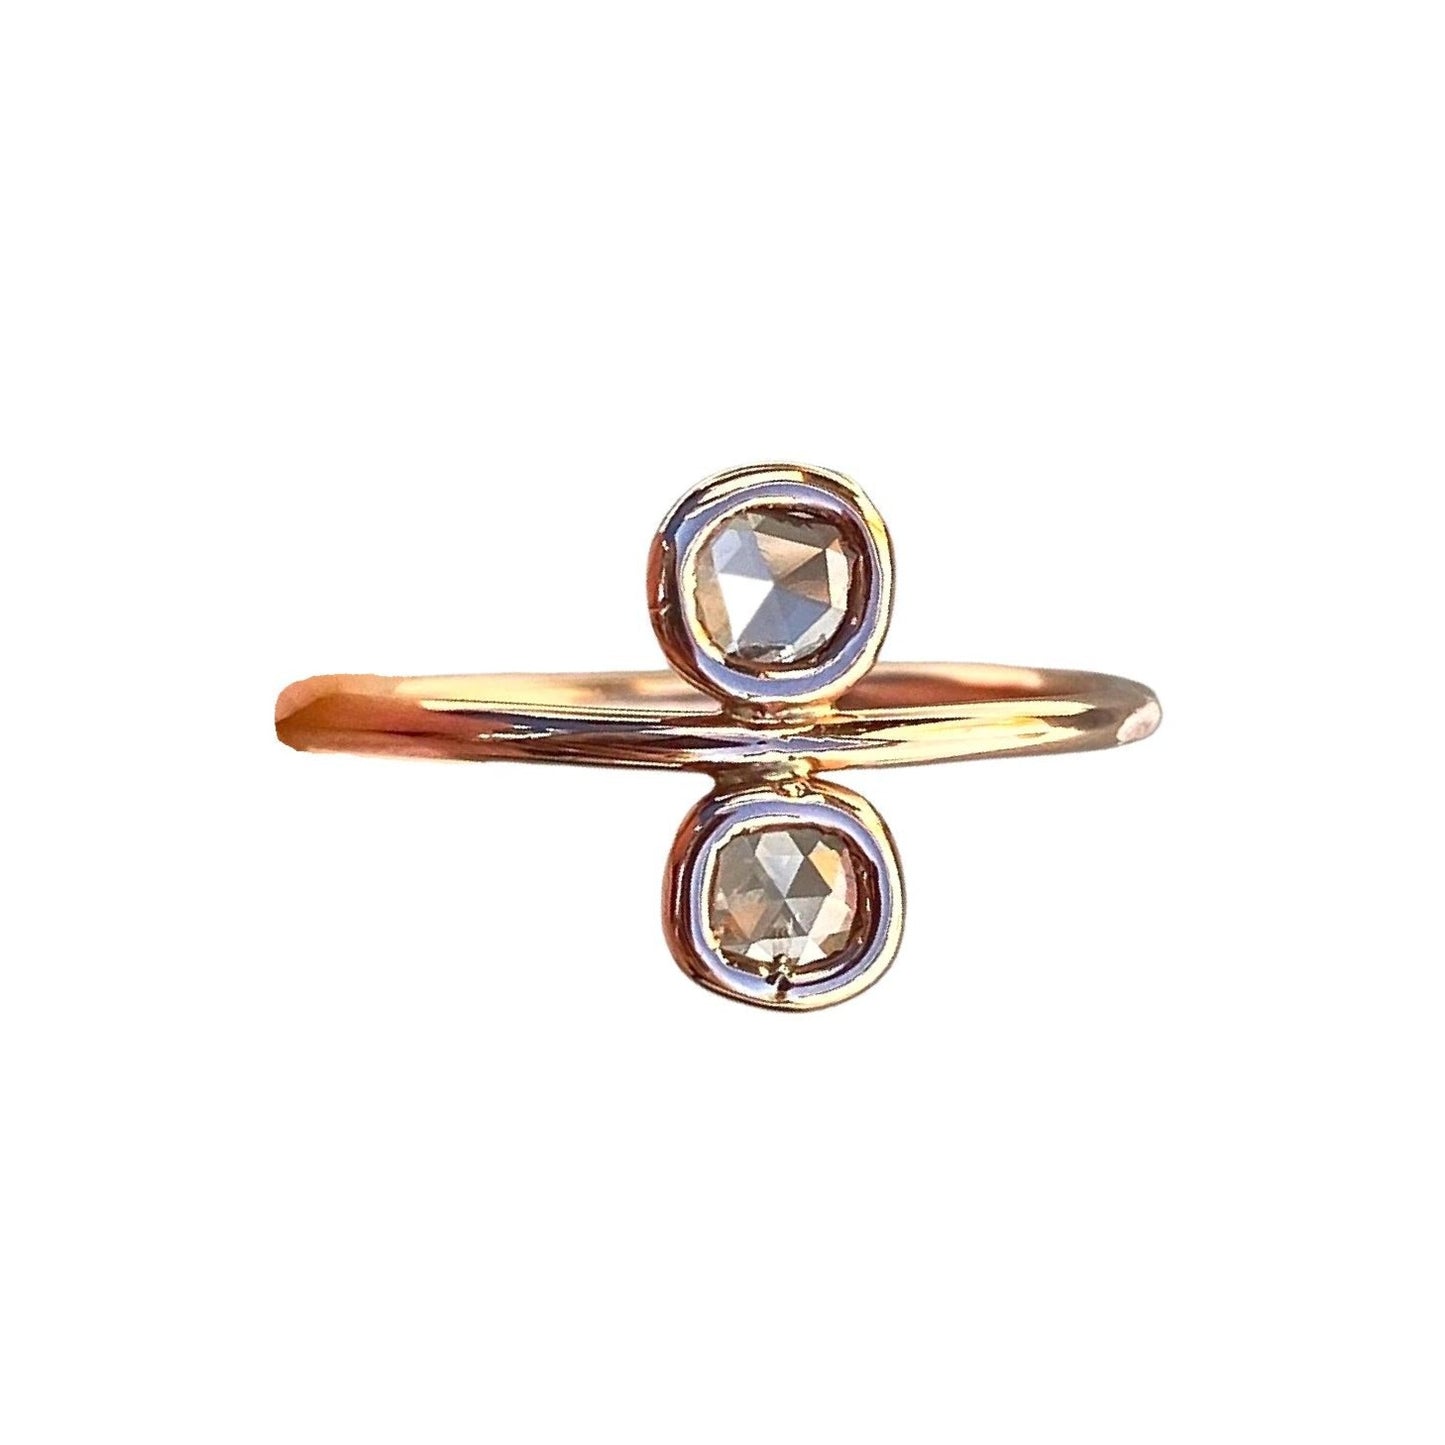 A delicate diamond slice rose gold ring by NIXIN Jewelry is displayed against a white background.